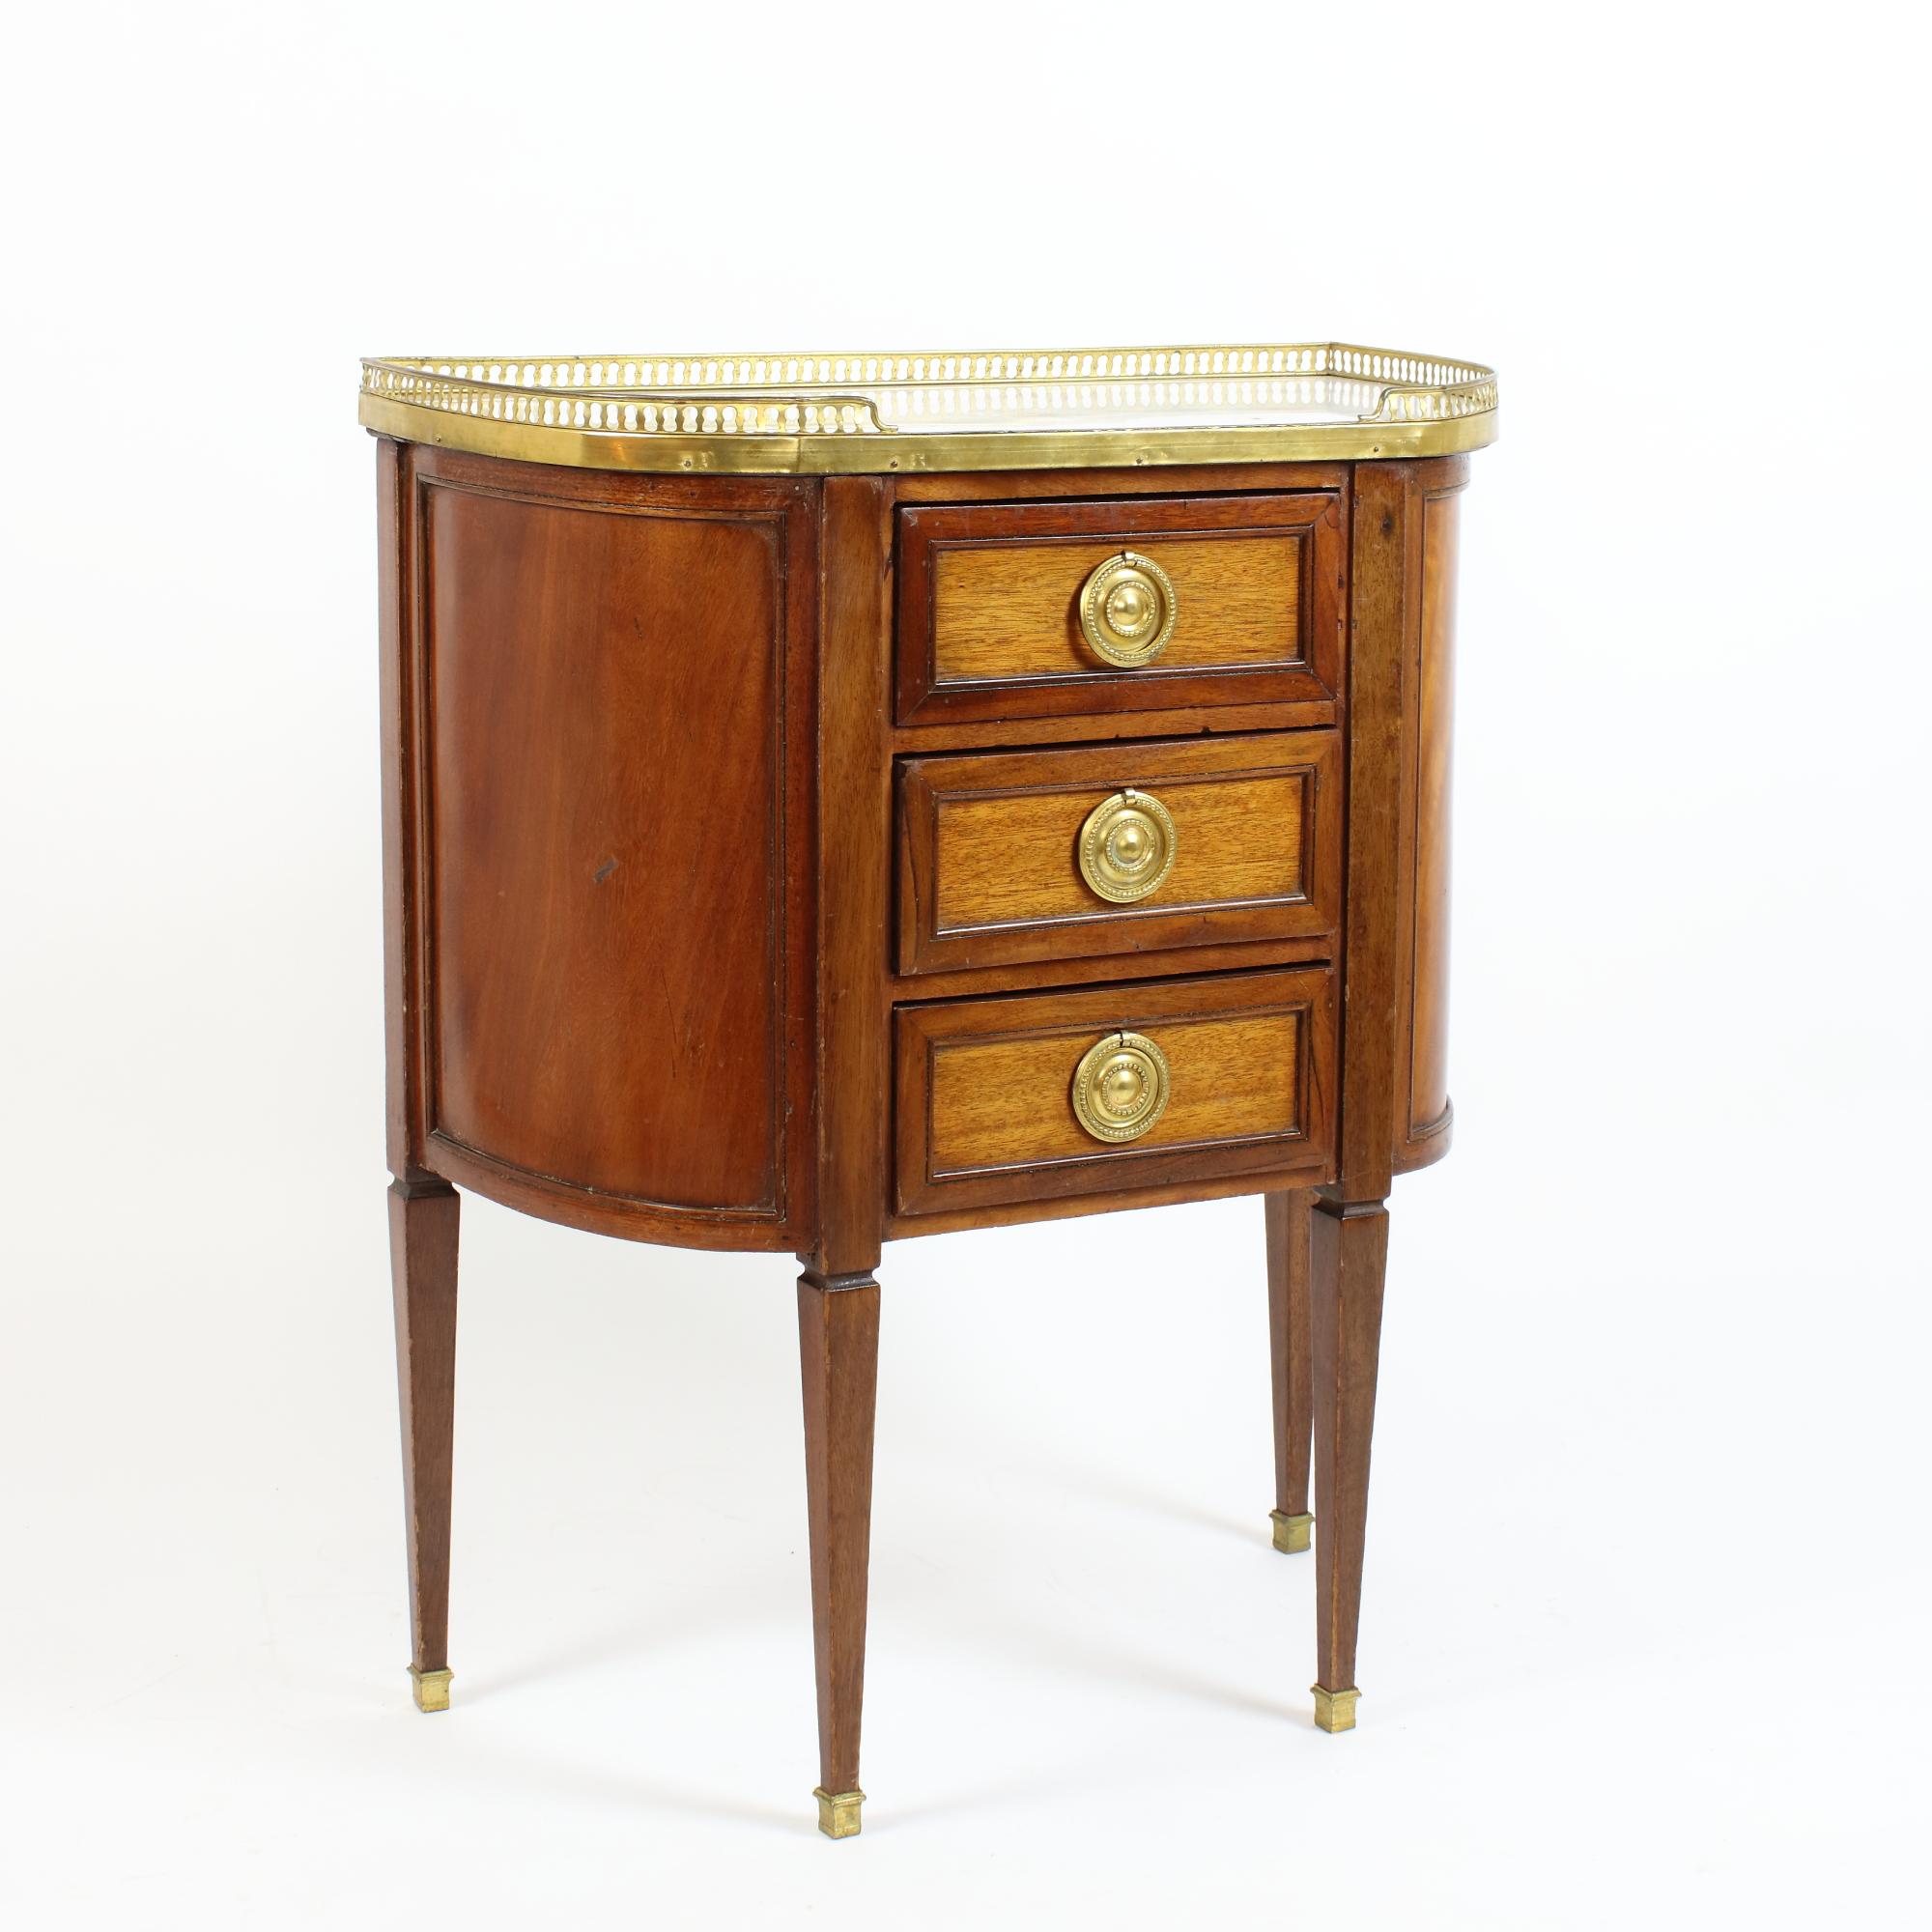 Late 18th Century Louis XVI walnut demilune commode or table chiffonière

A demilune or semi-ellyptical commode with a straight front and curved sides: The commode is raised by four tapering rectangular legs with gilt-bronze sabots and opens with